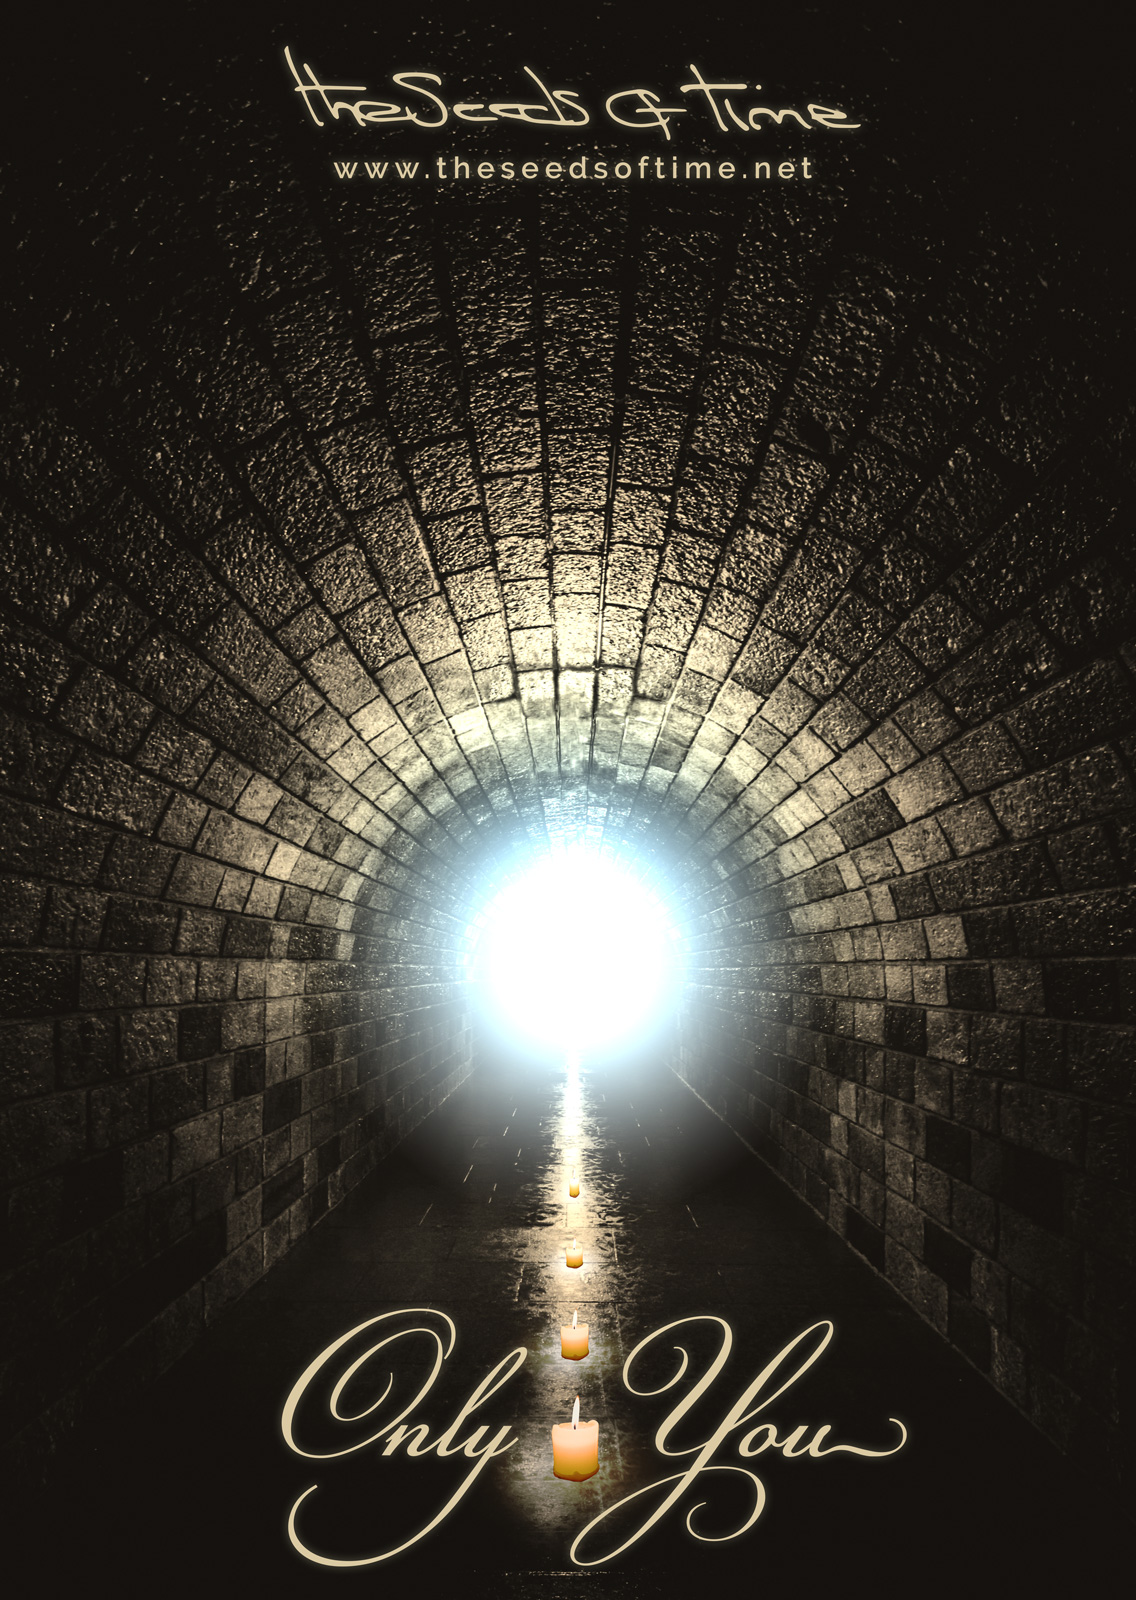 Poster art for song 'Only You' from album titled Random Exposure by The Seeds of Time on which there is shown a tunnel lit by a set of candles and a bright flash of sky blue light at the end of it